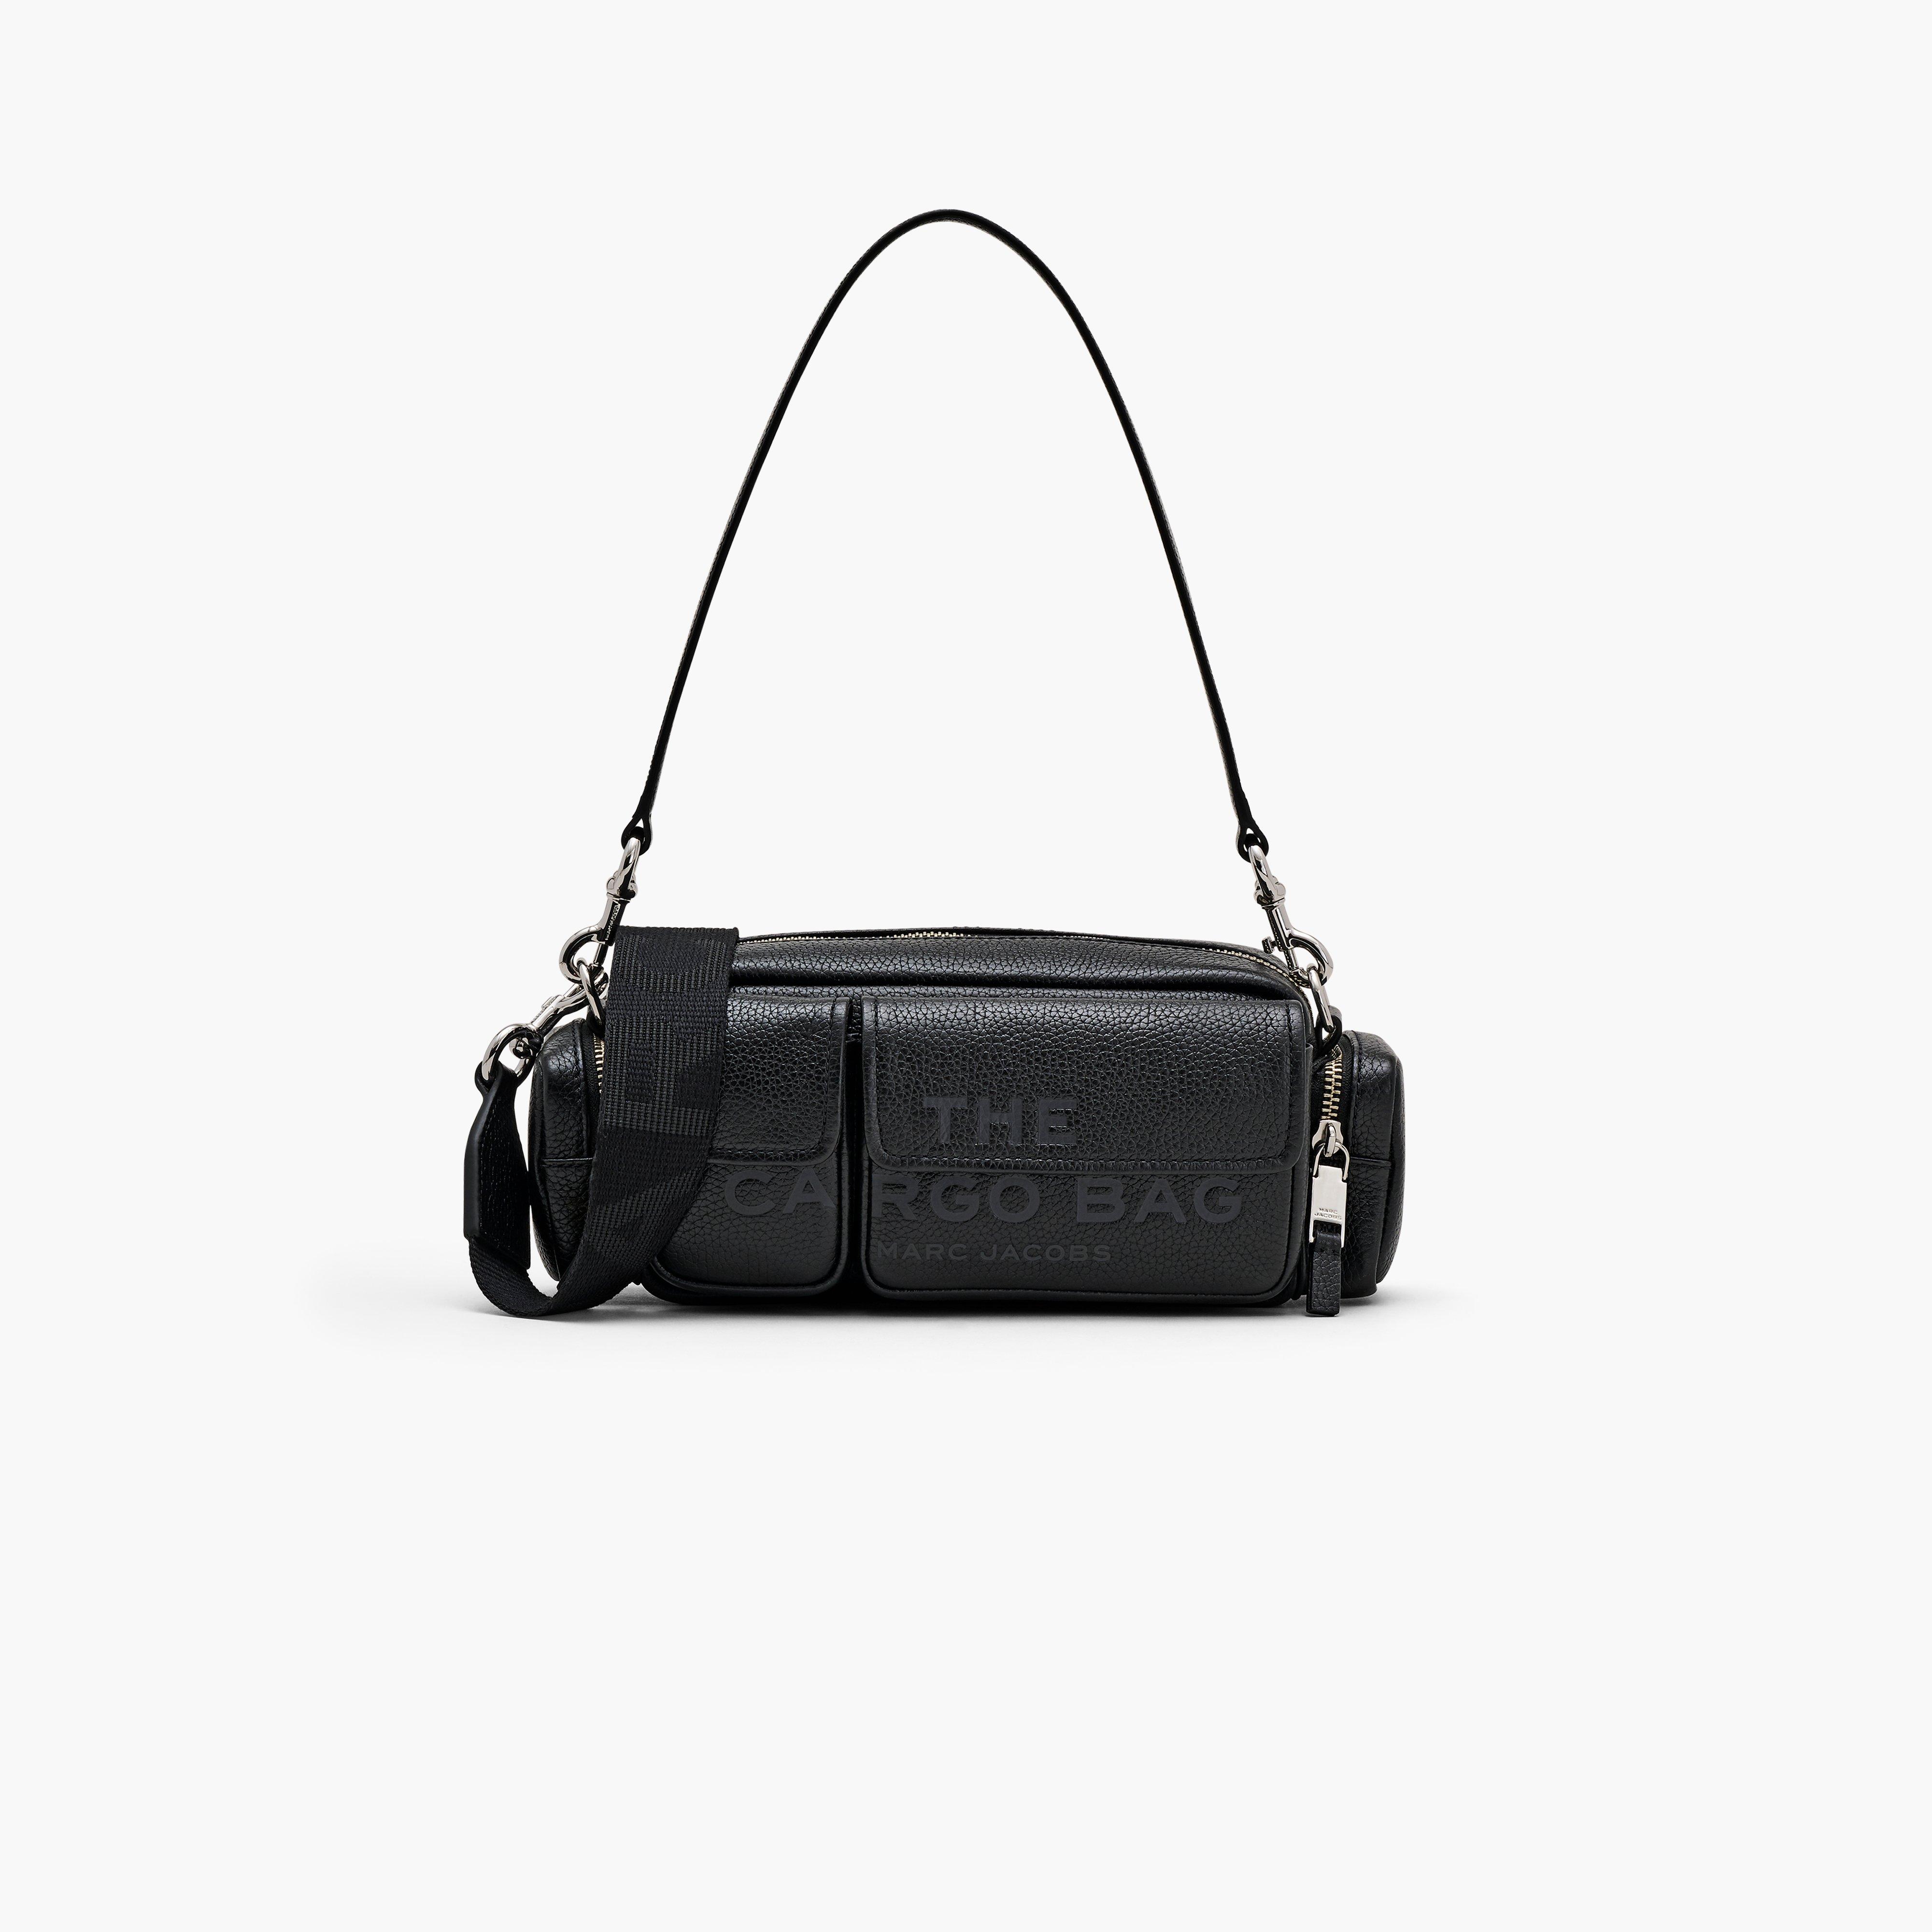 Marc by Marc jacobs The Leather Cargo Bag,BLACK